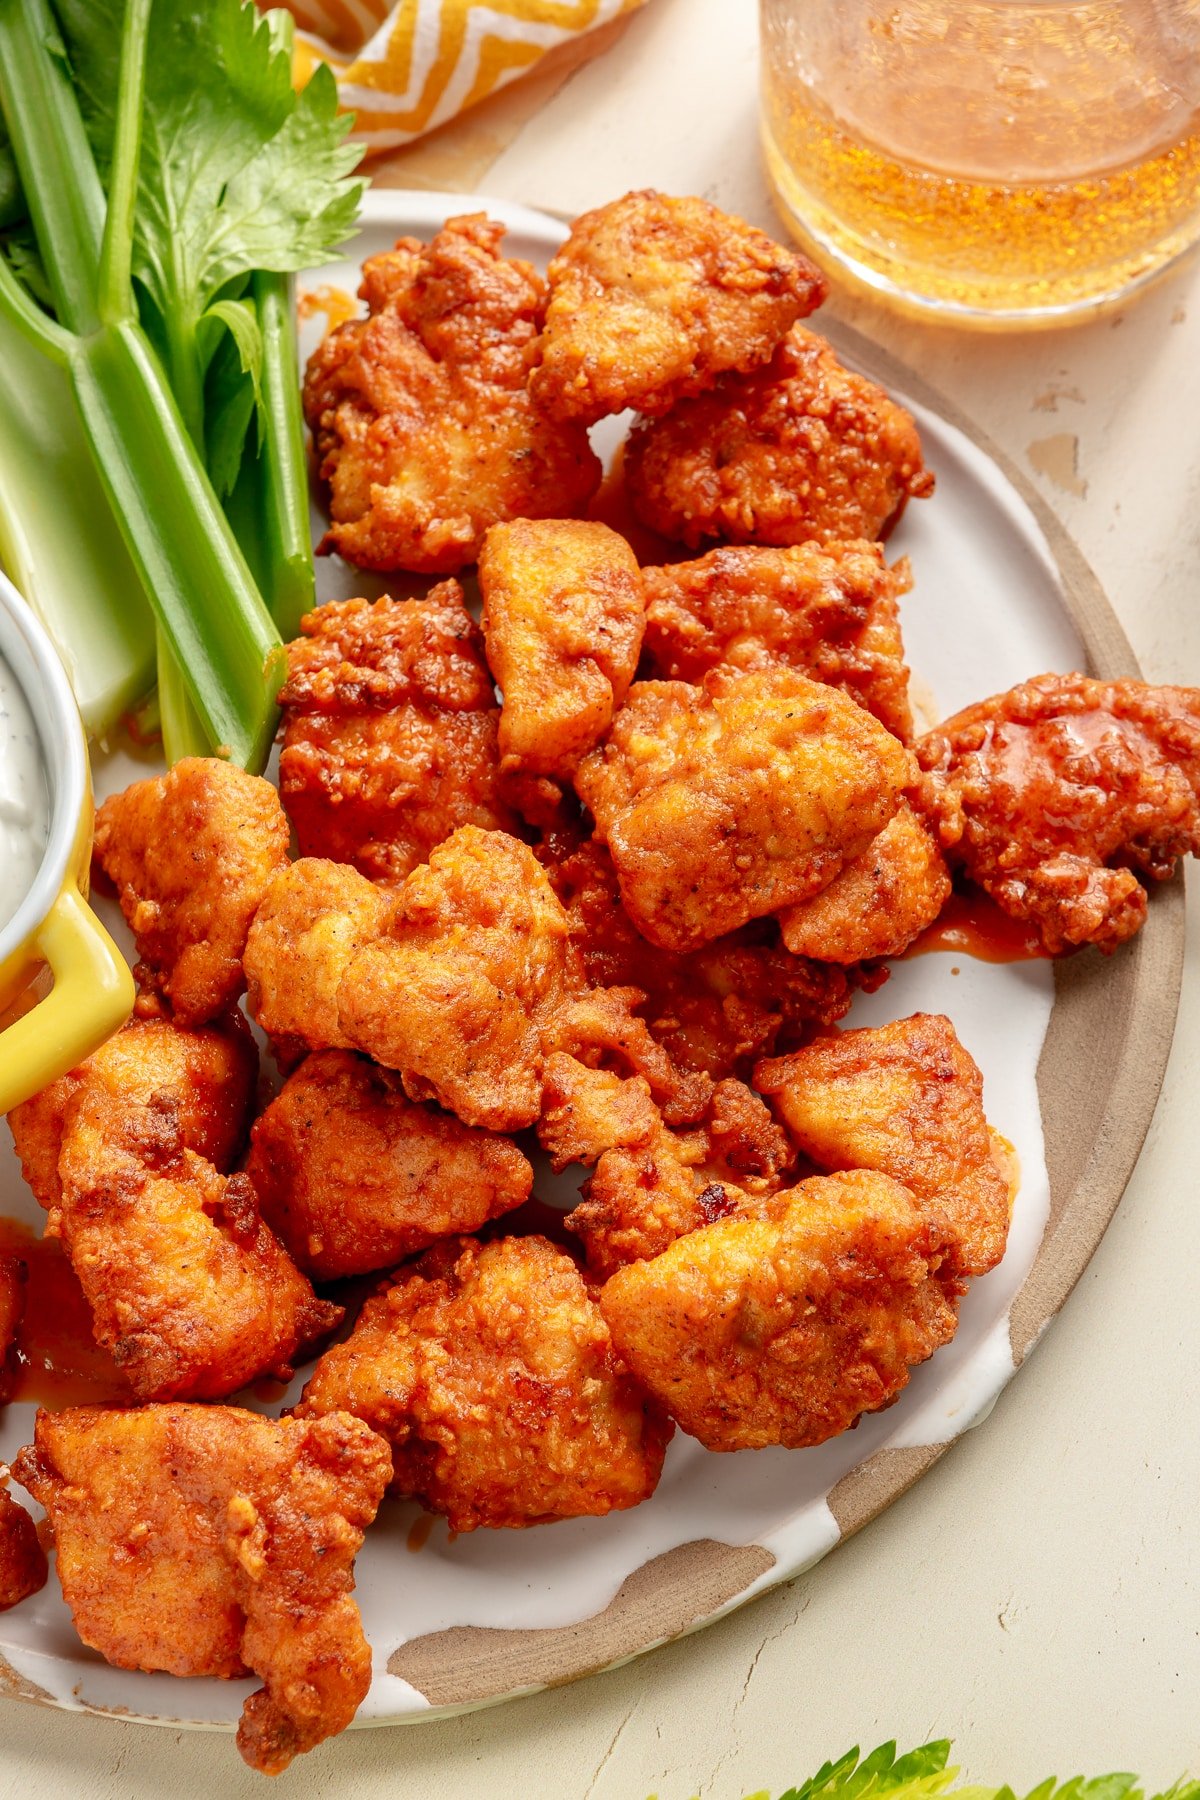 Buffalo chicken bites sit on a serving plate next to a side of blue cheese dip. Pieces of celery sit to the side.